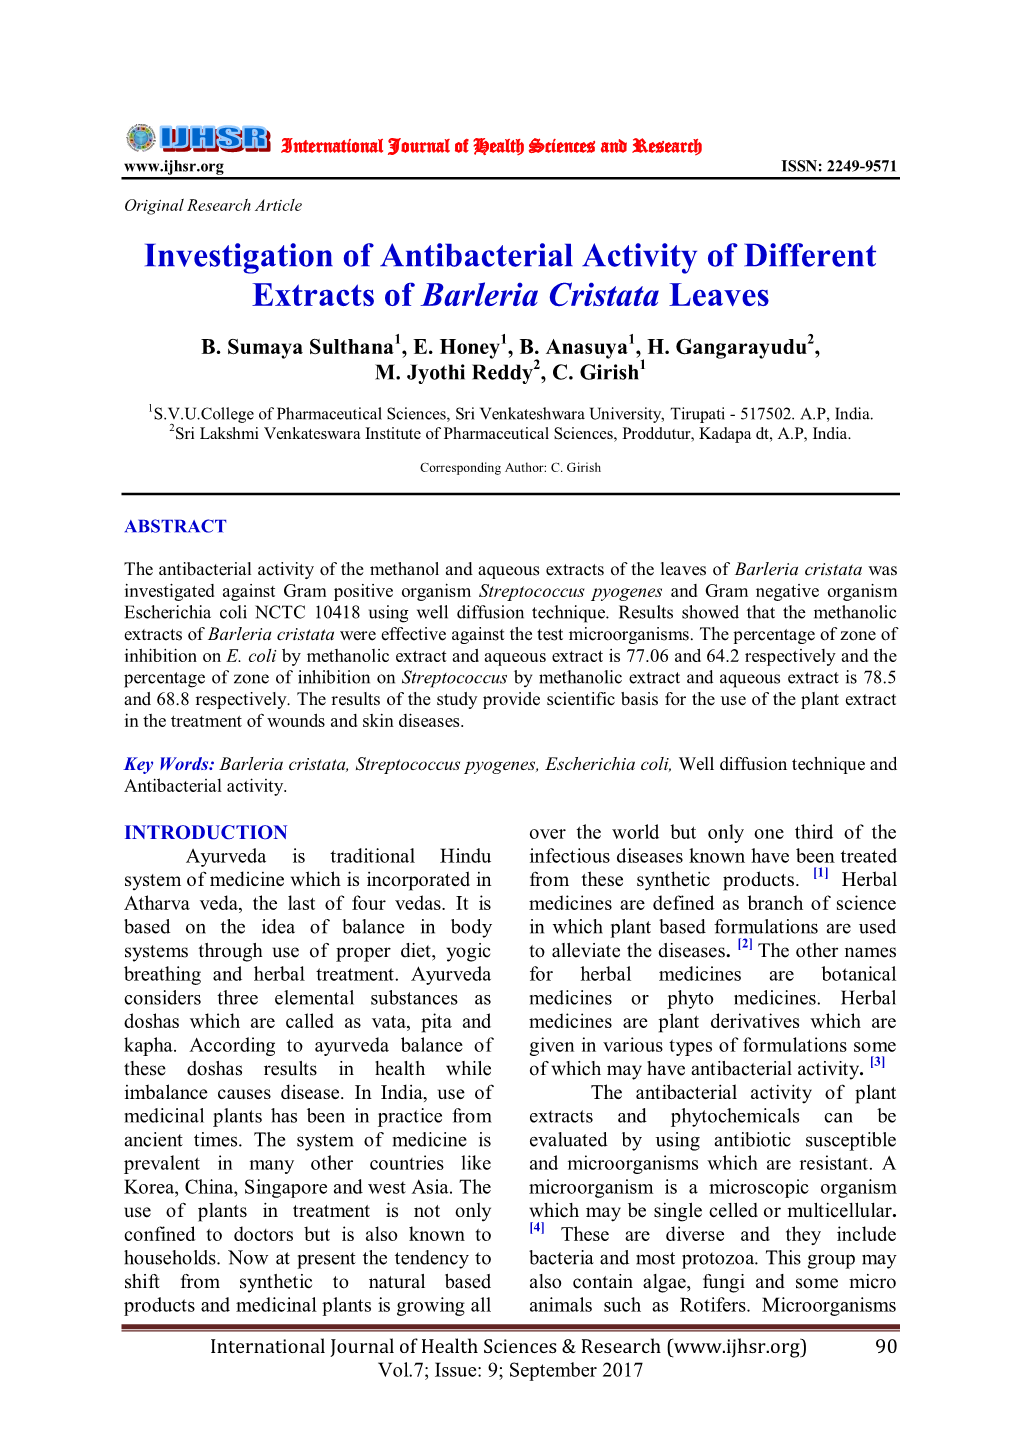 Investigation of Antibacterial Activity of Different Extracts of Barleria Cristata Leaves